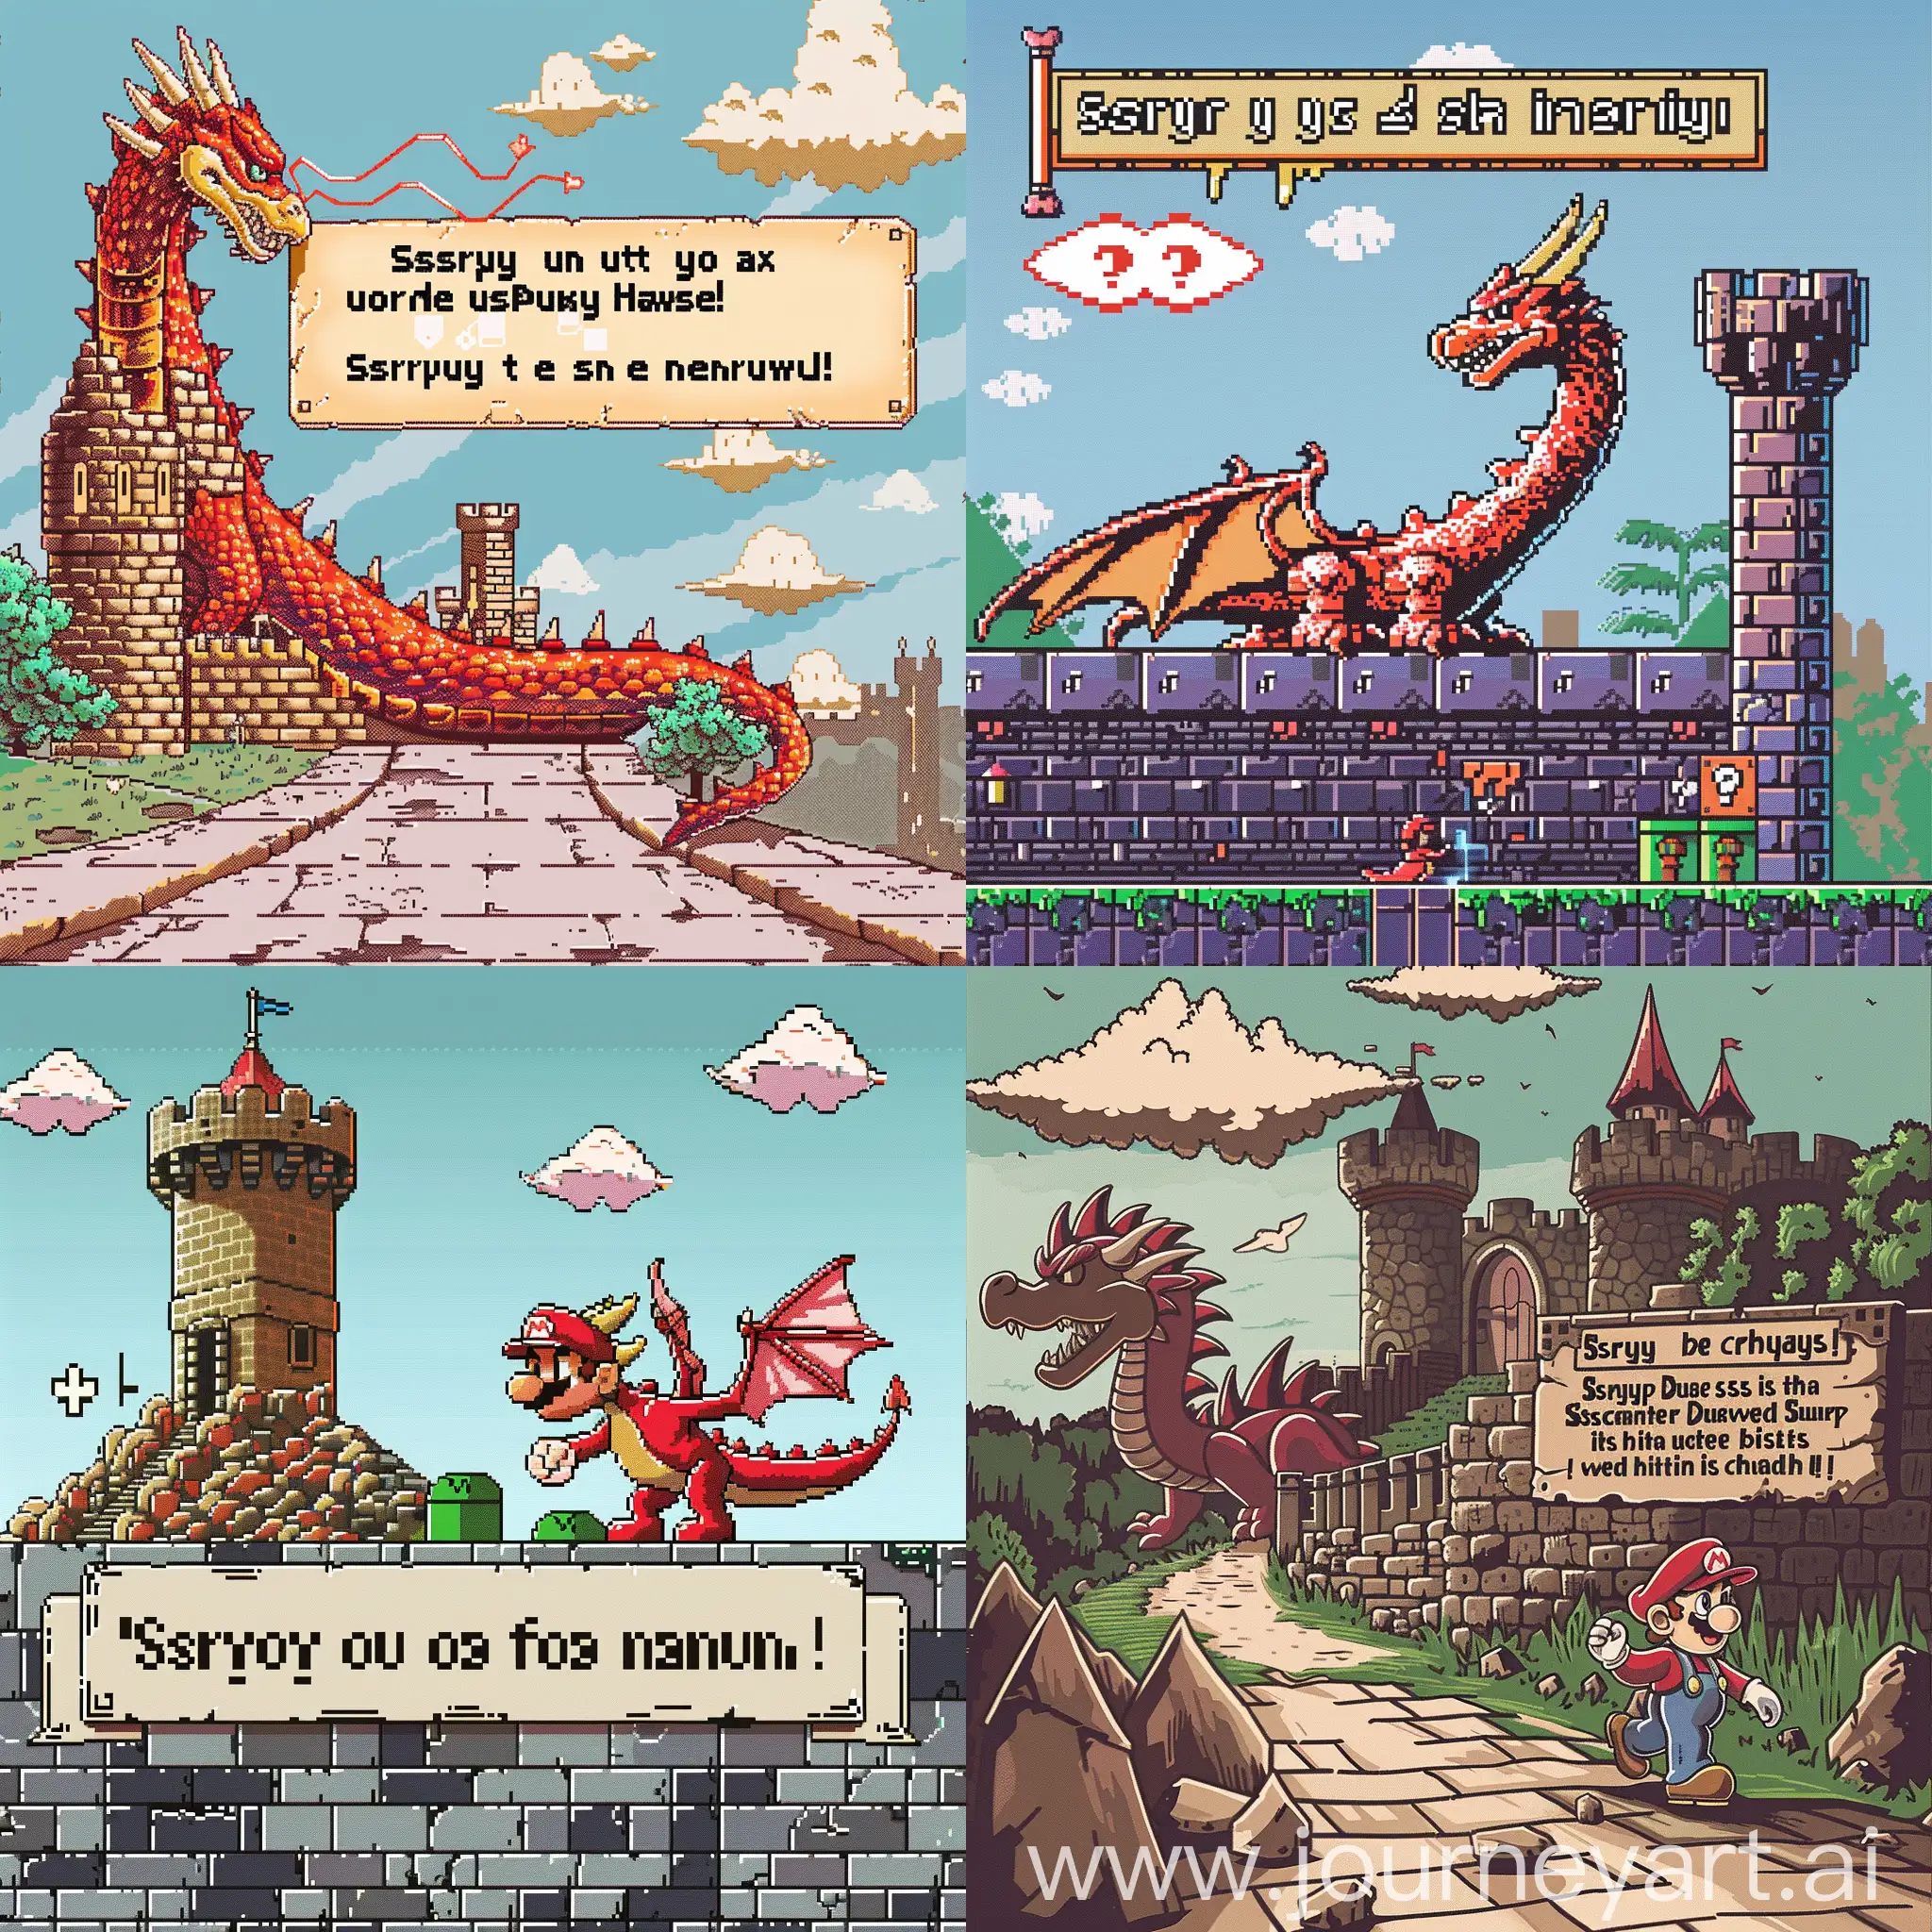 Mario walked a long way, killed the dragon and saw the inscription "Sorry, but the princess is in another castle!" in 8-bit style